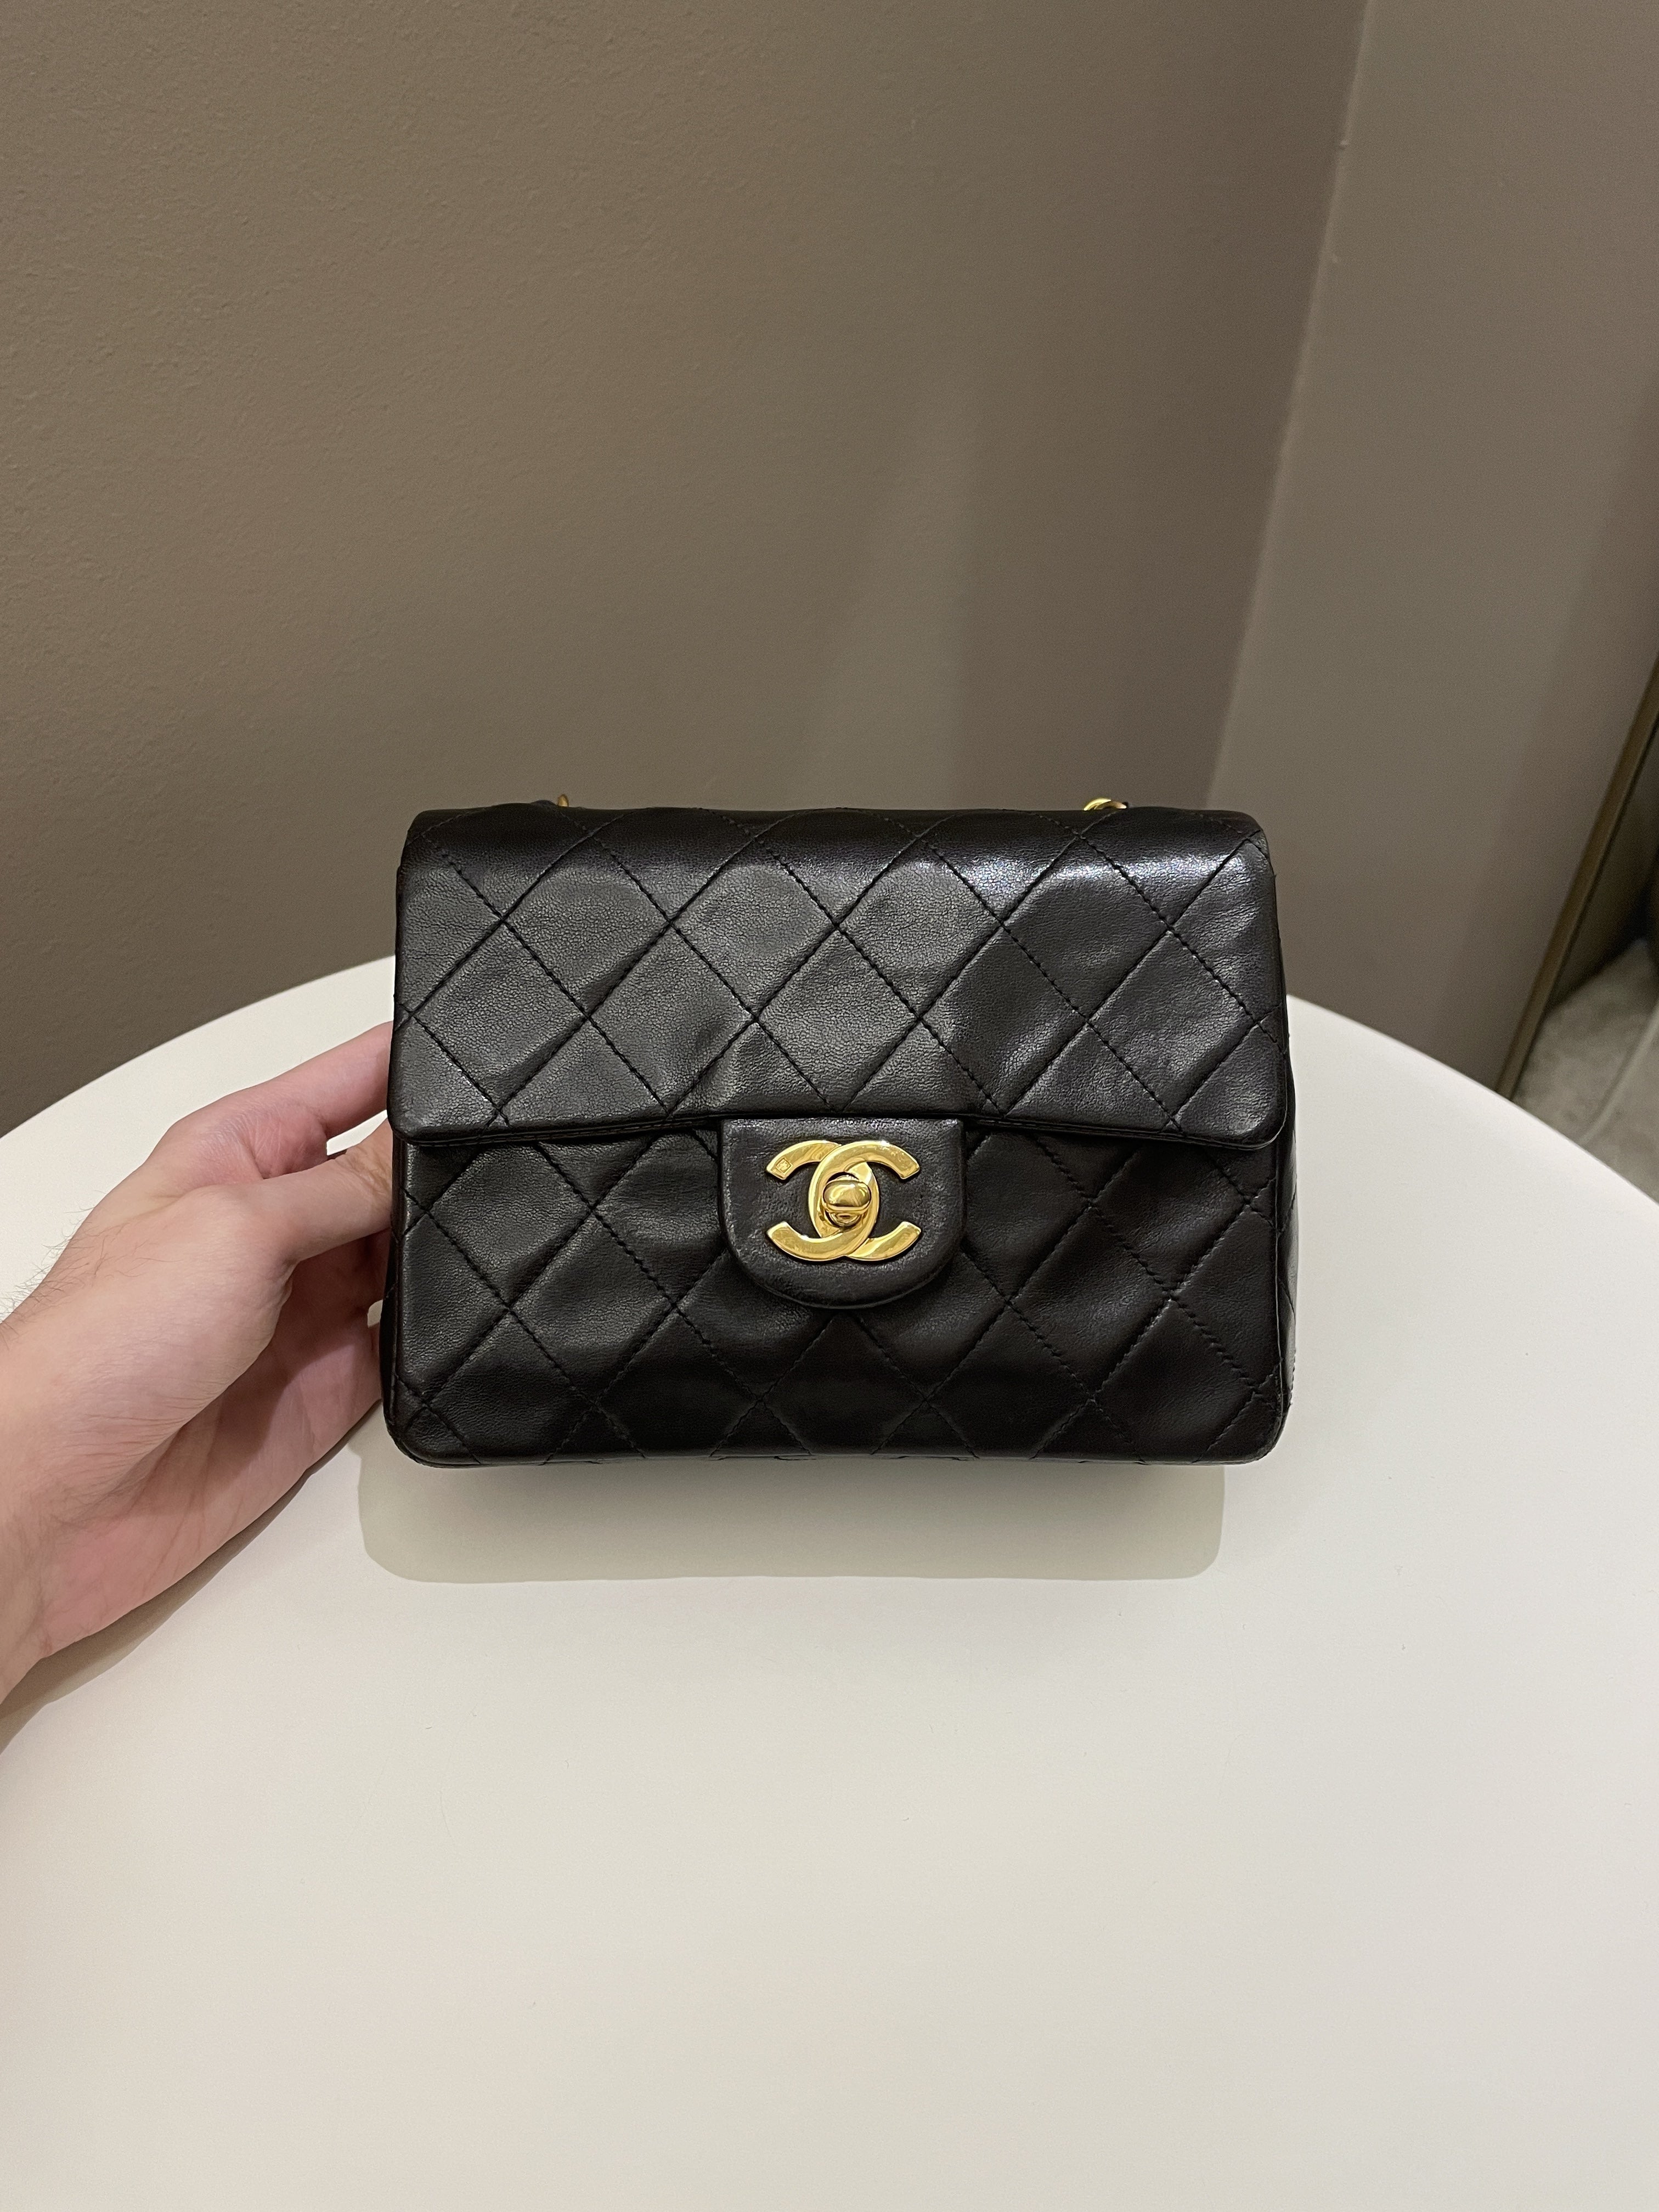 Chanel Vintage Classic Quilted Mini Square
Black Lambskin